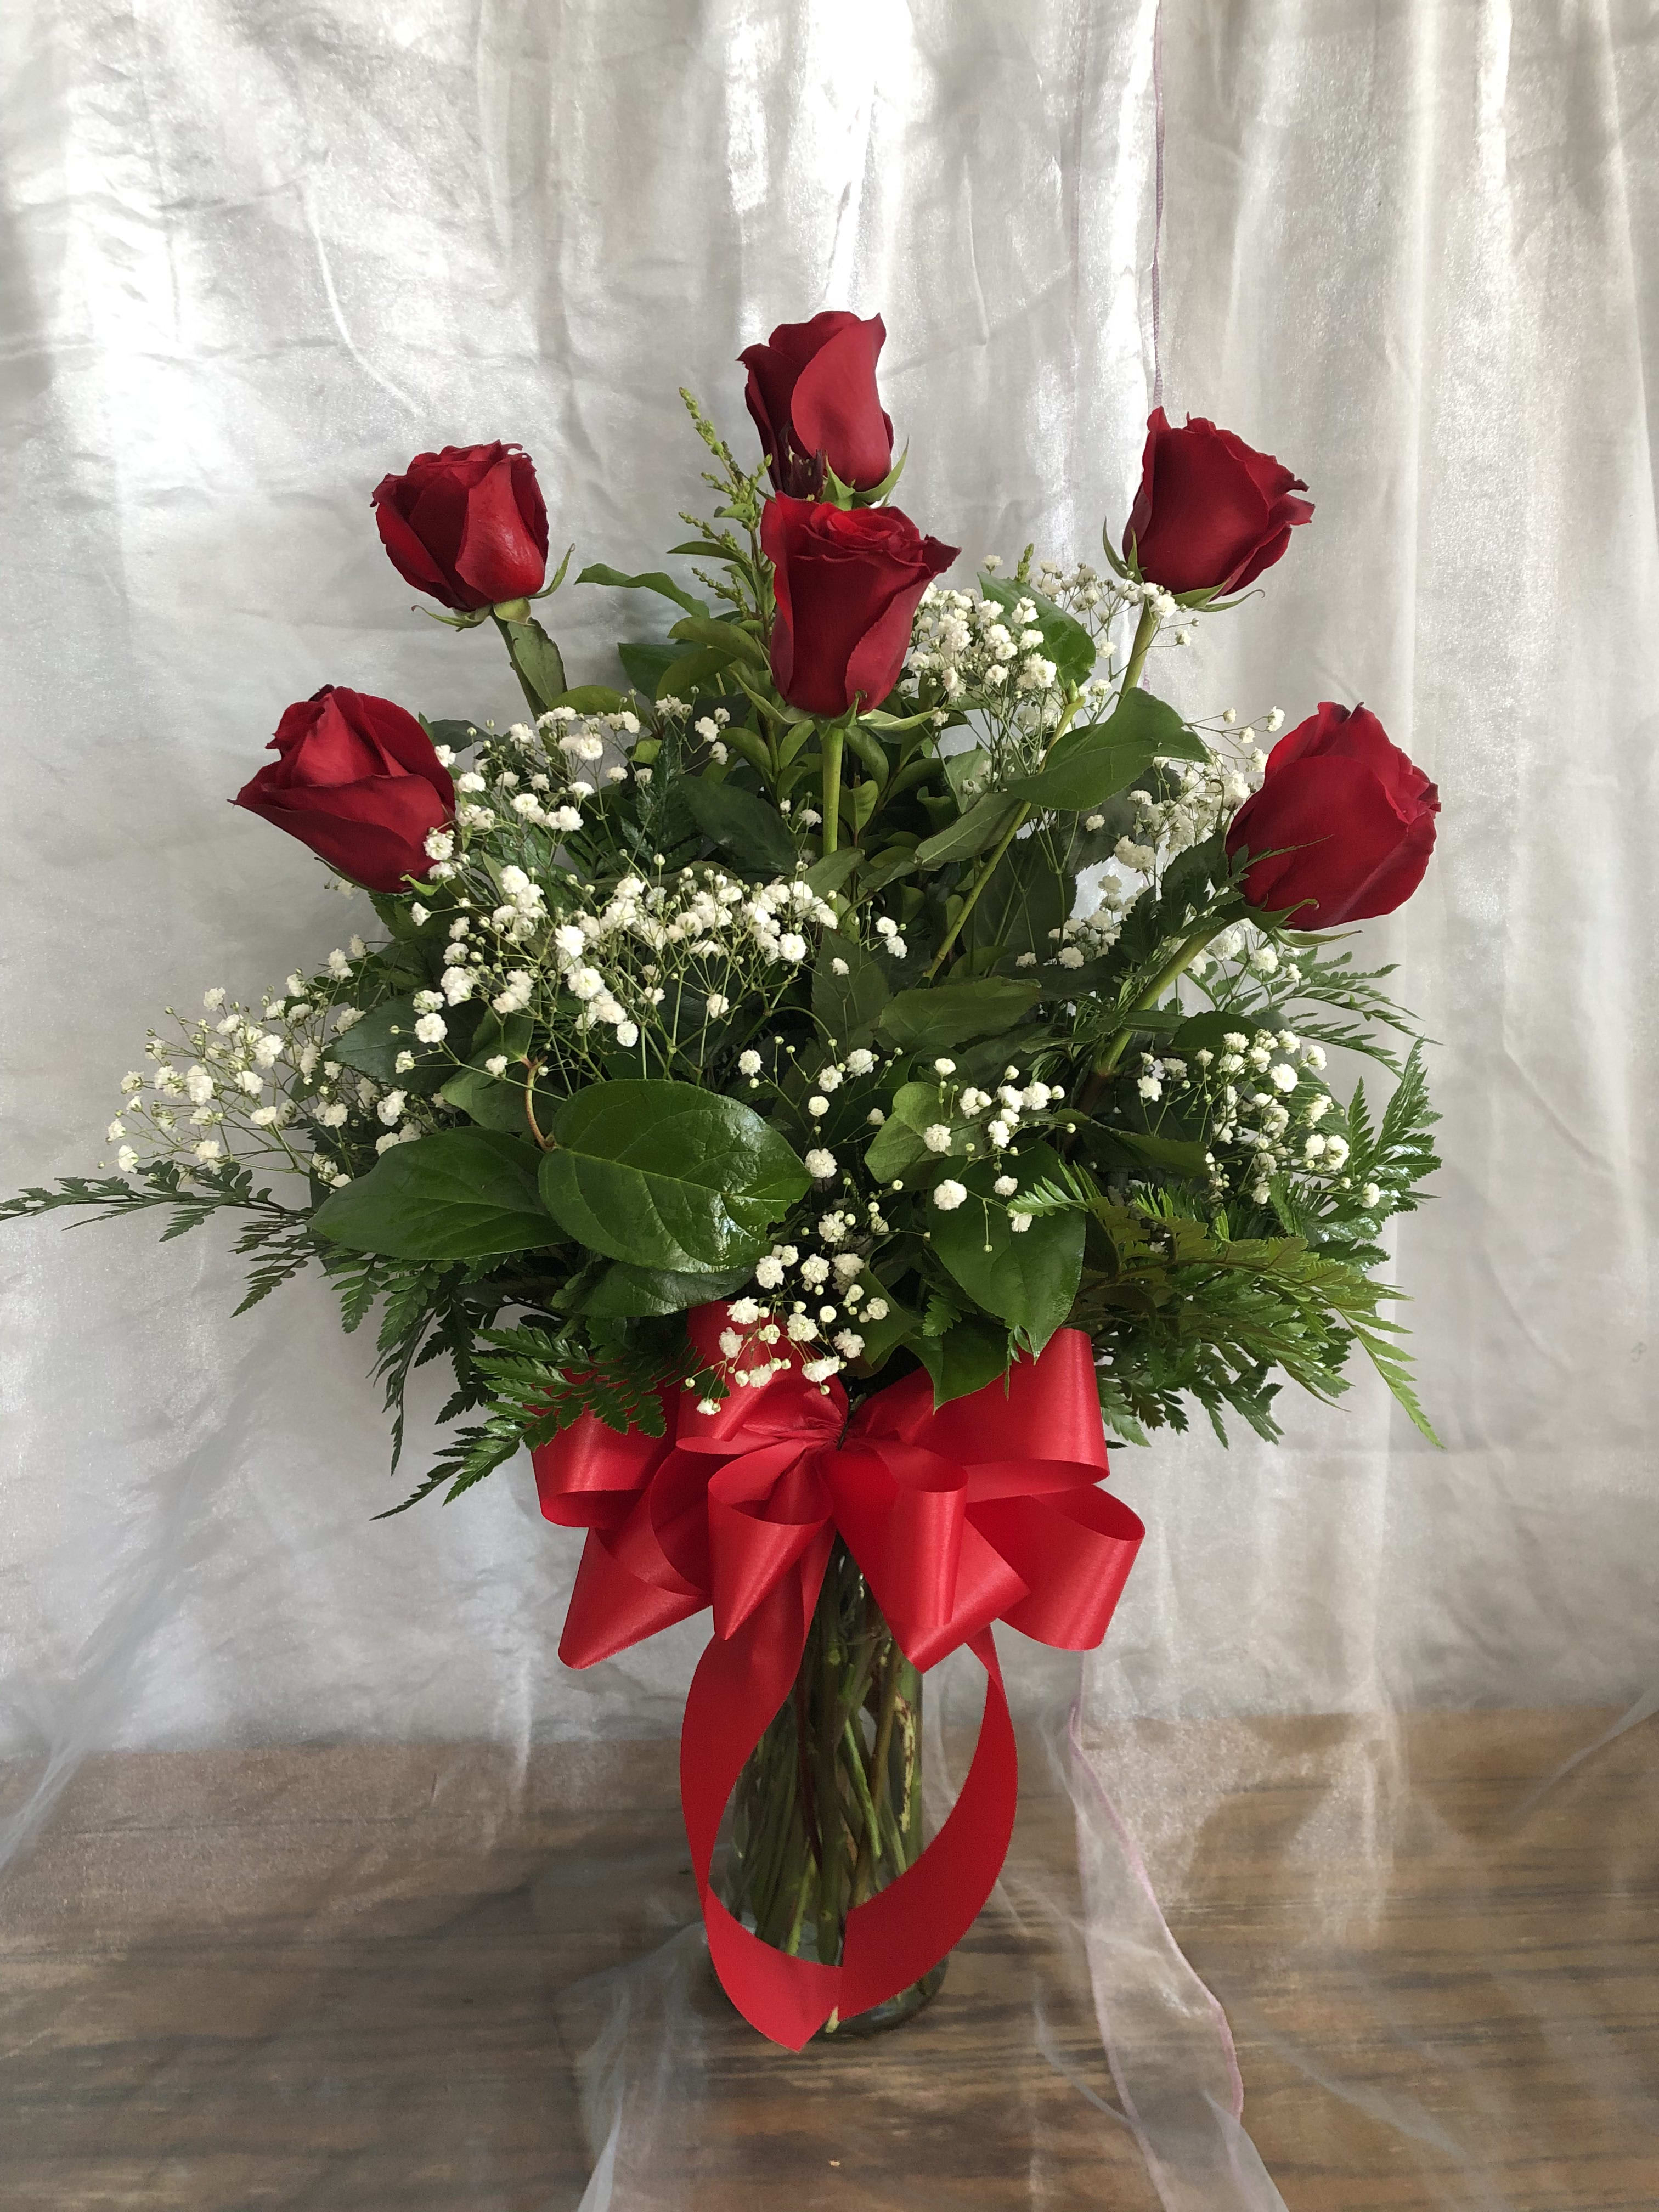 #5 - Half Dozen Red Roses  - This arrangement has six Red Roses with Babies Breathe and a Red Ribbon. 